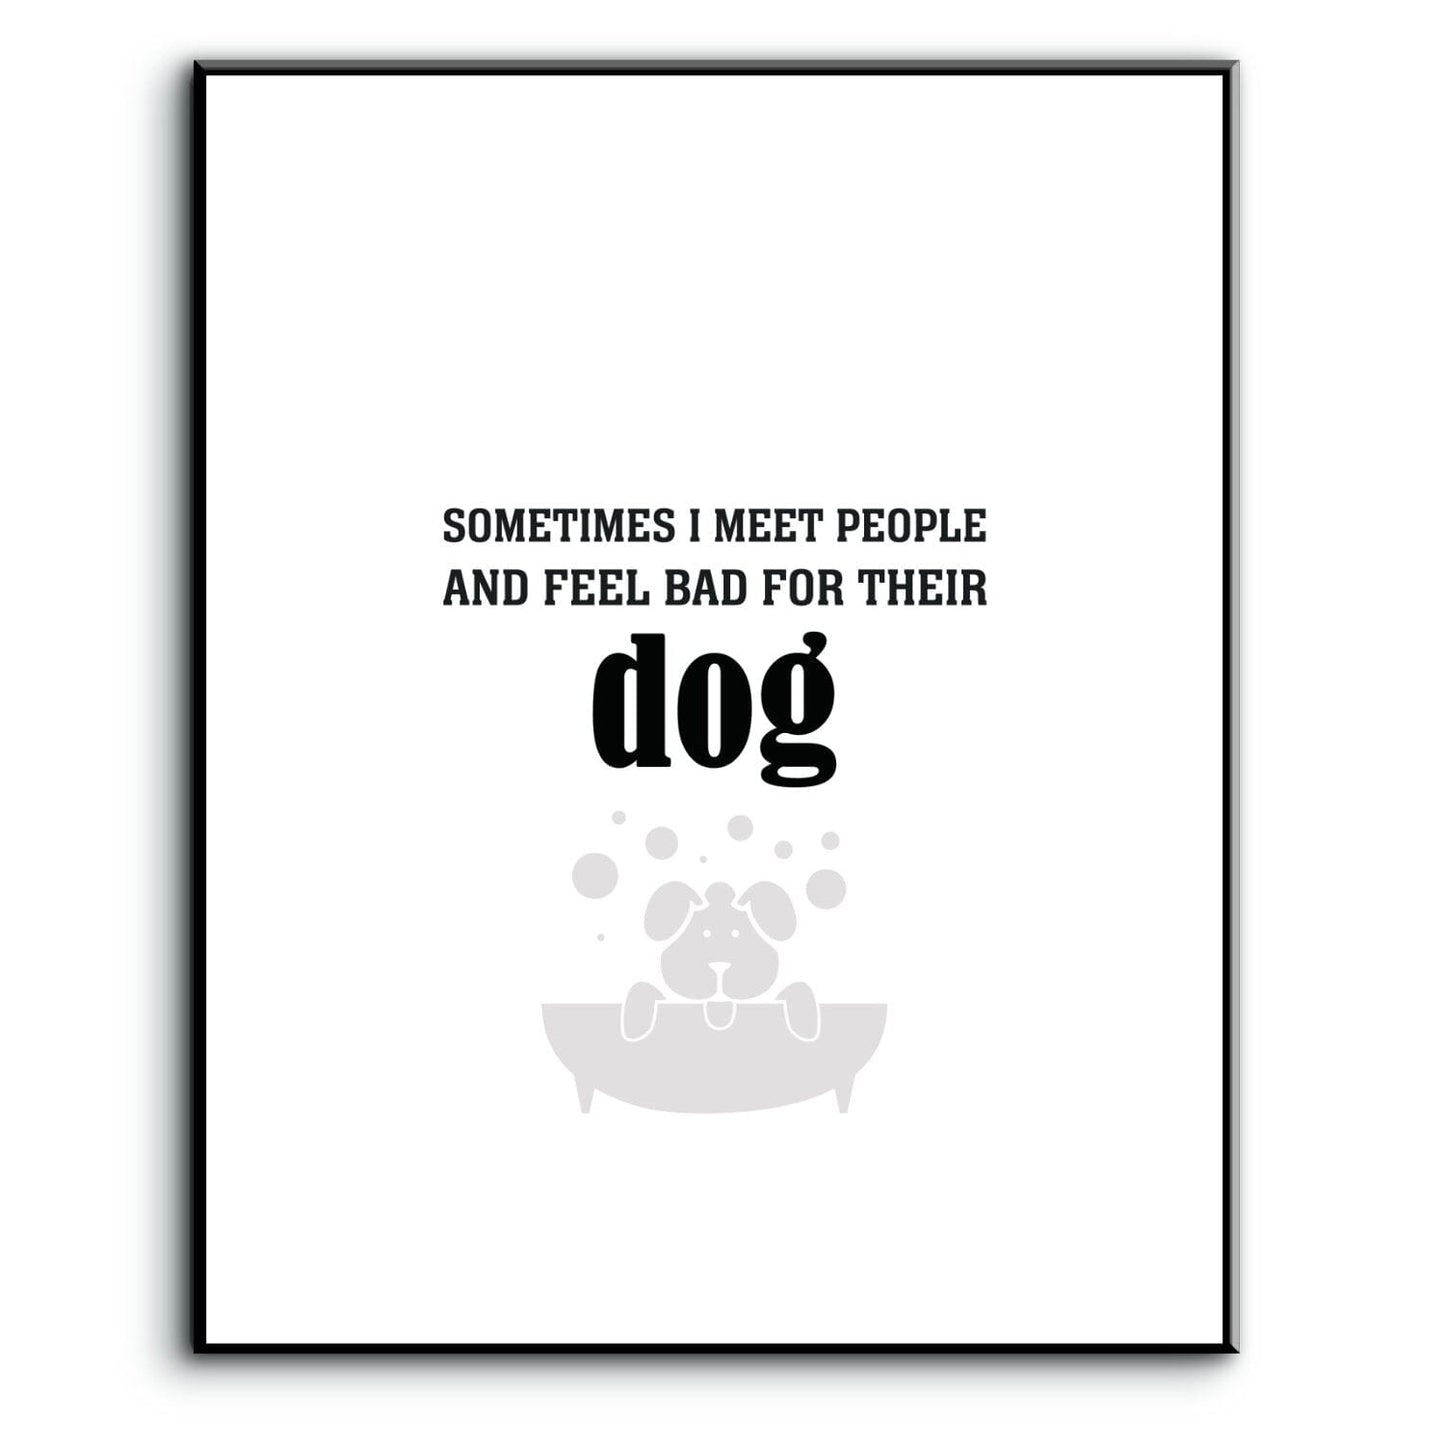 Sometimes I Meet People and Feel Bad for Their Dog Print Wise and Wiseass Quotes Song Lyrics Art 8x10 Plaque Mount 